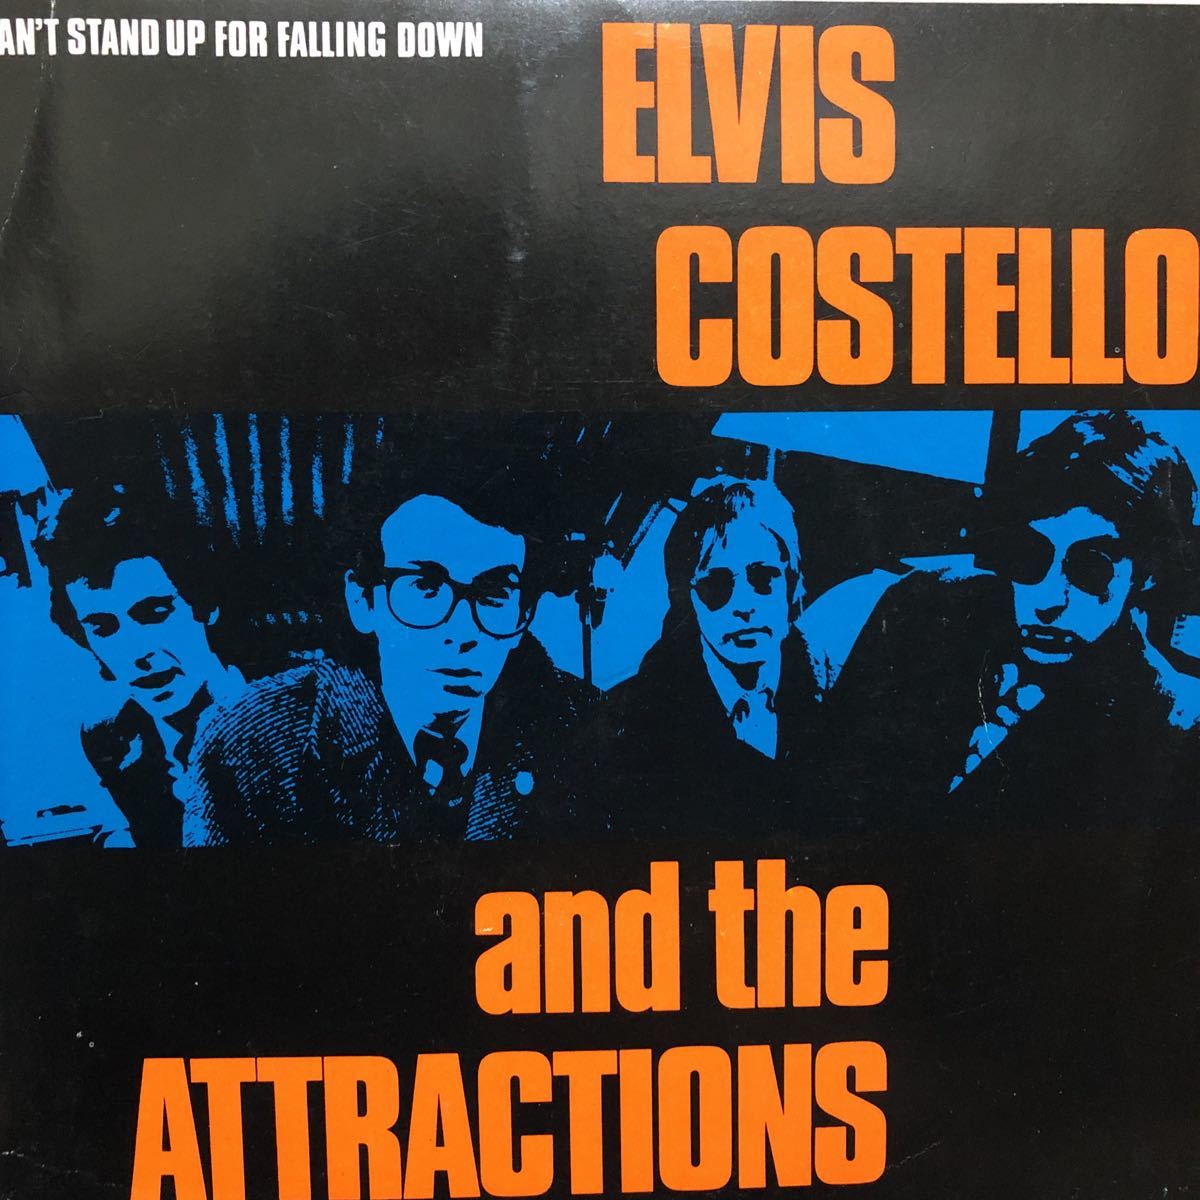 【UK盤】ELVIS COSTELLO & THE ATTRACTIONS / I CAN'T STAND UP FOR FALLING DOWN 7inch EP_画像1